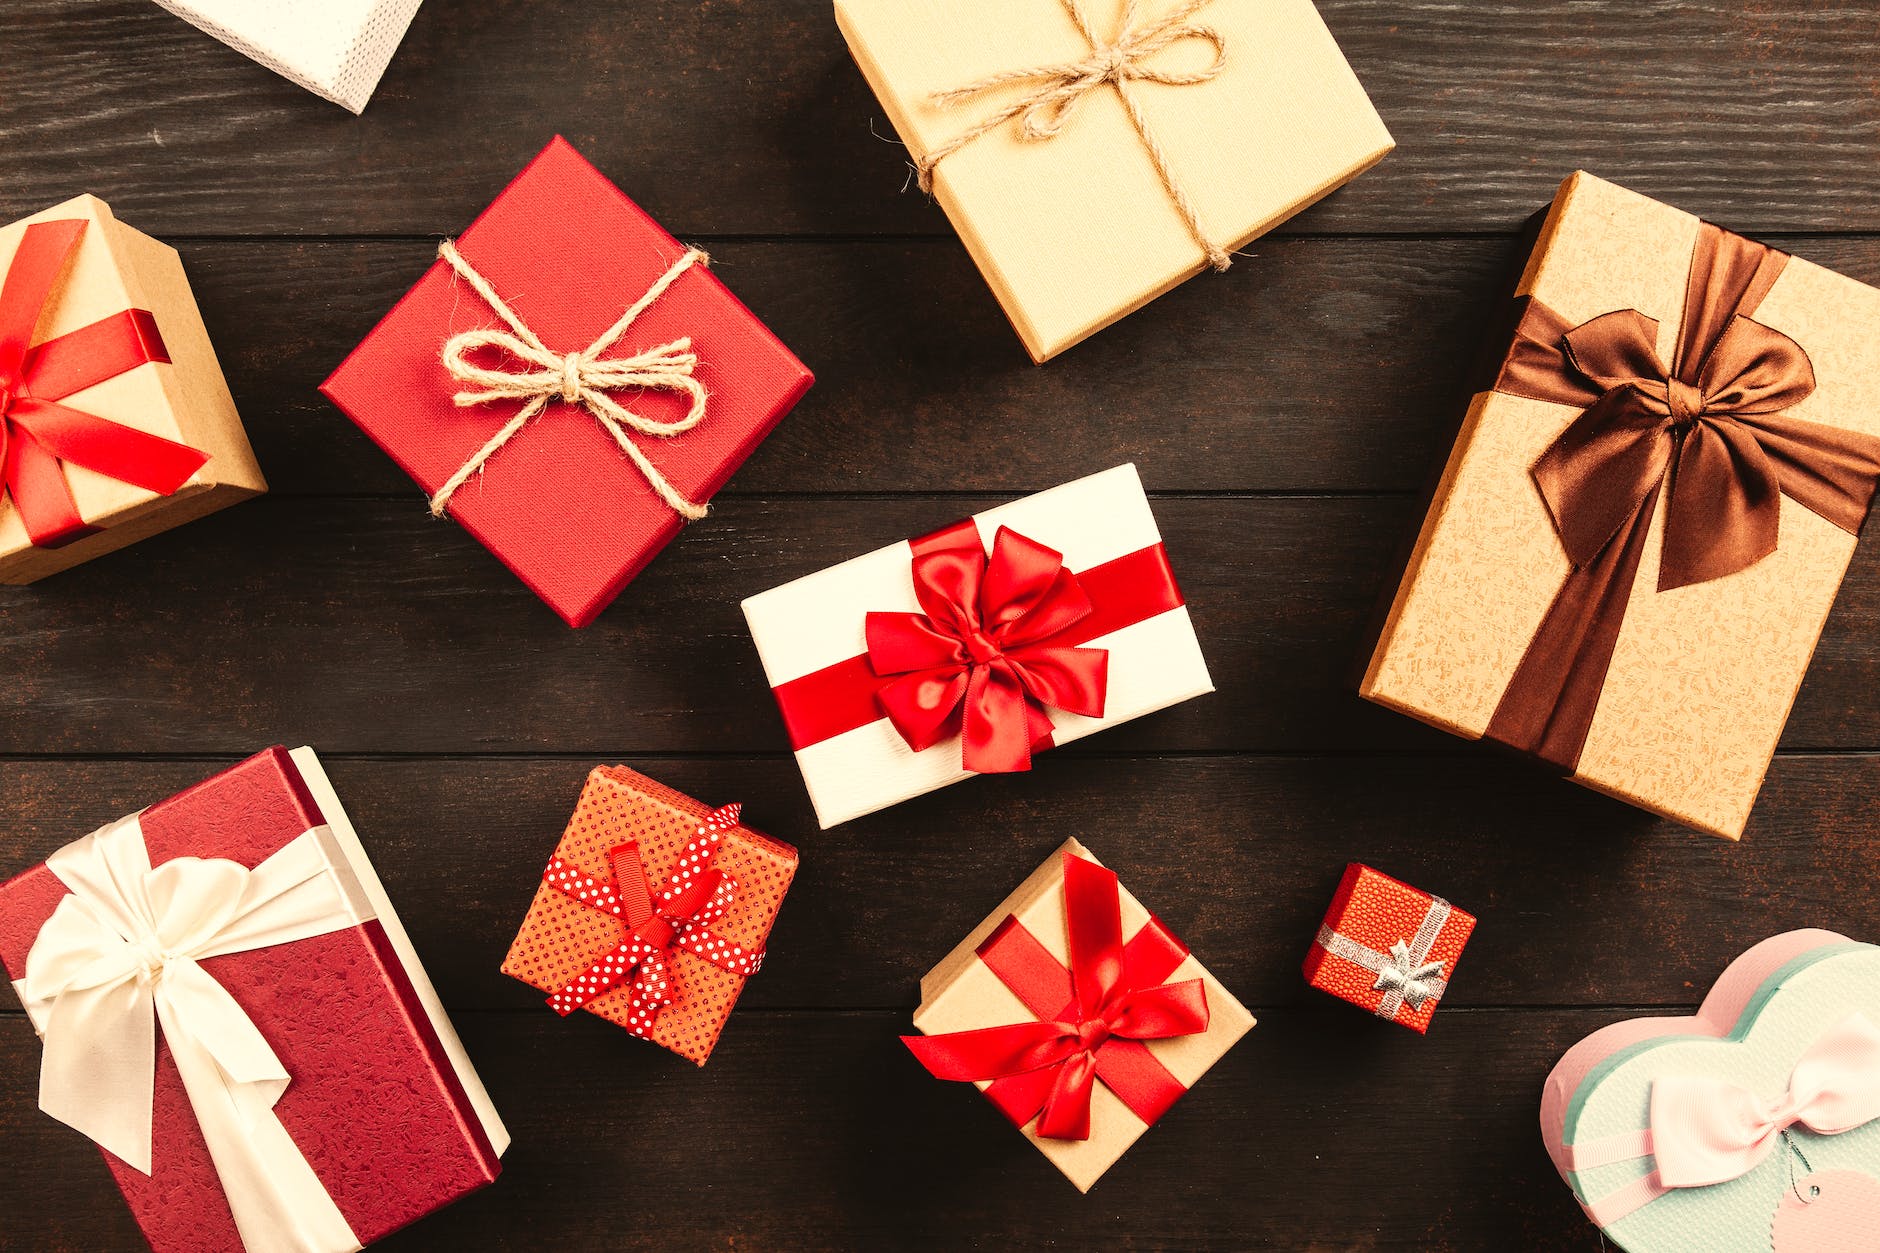 Top Tips for Finding Unique Gifts This Festive Season